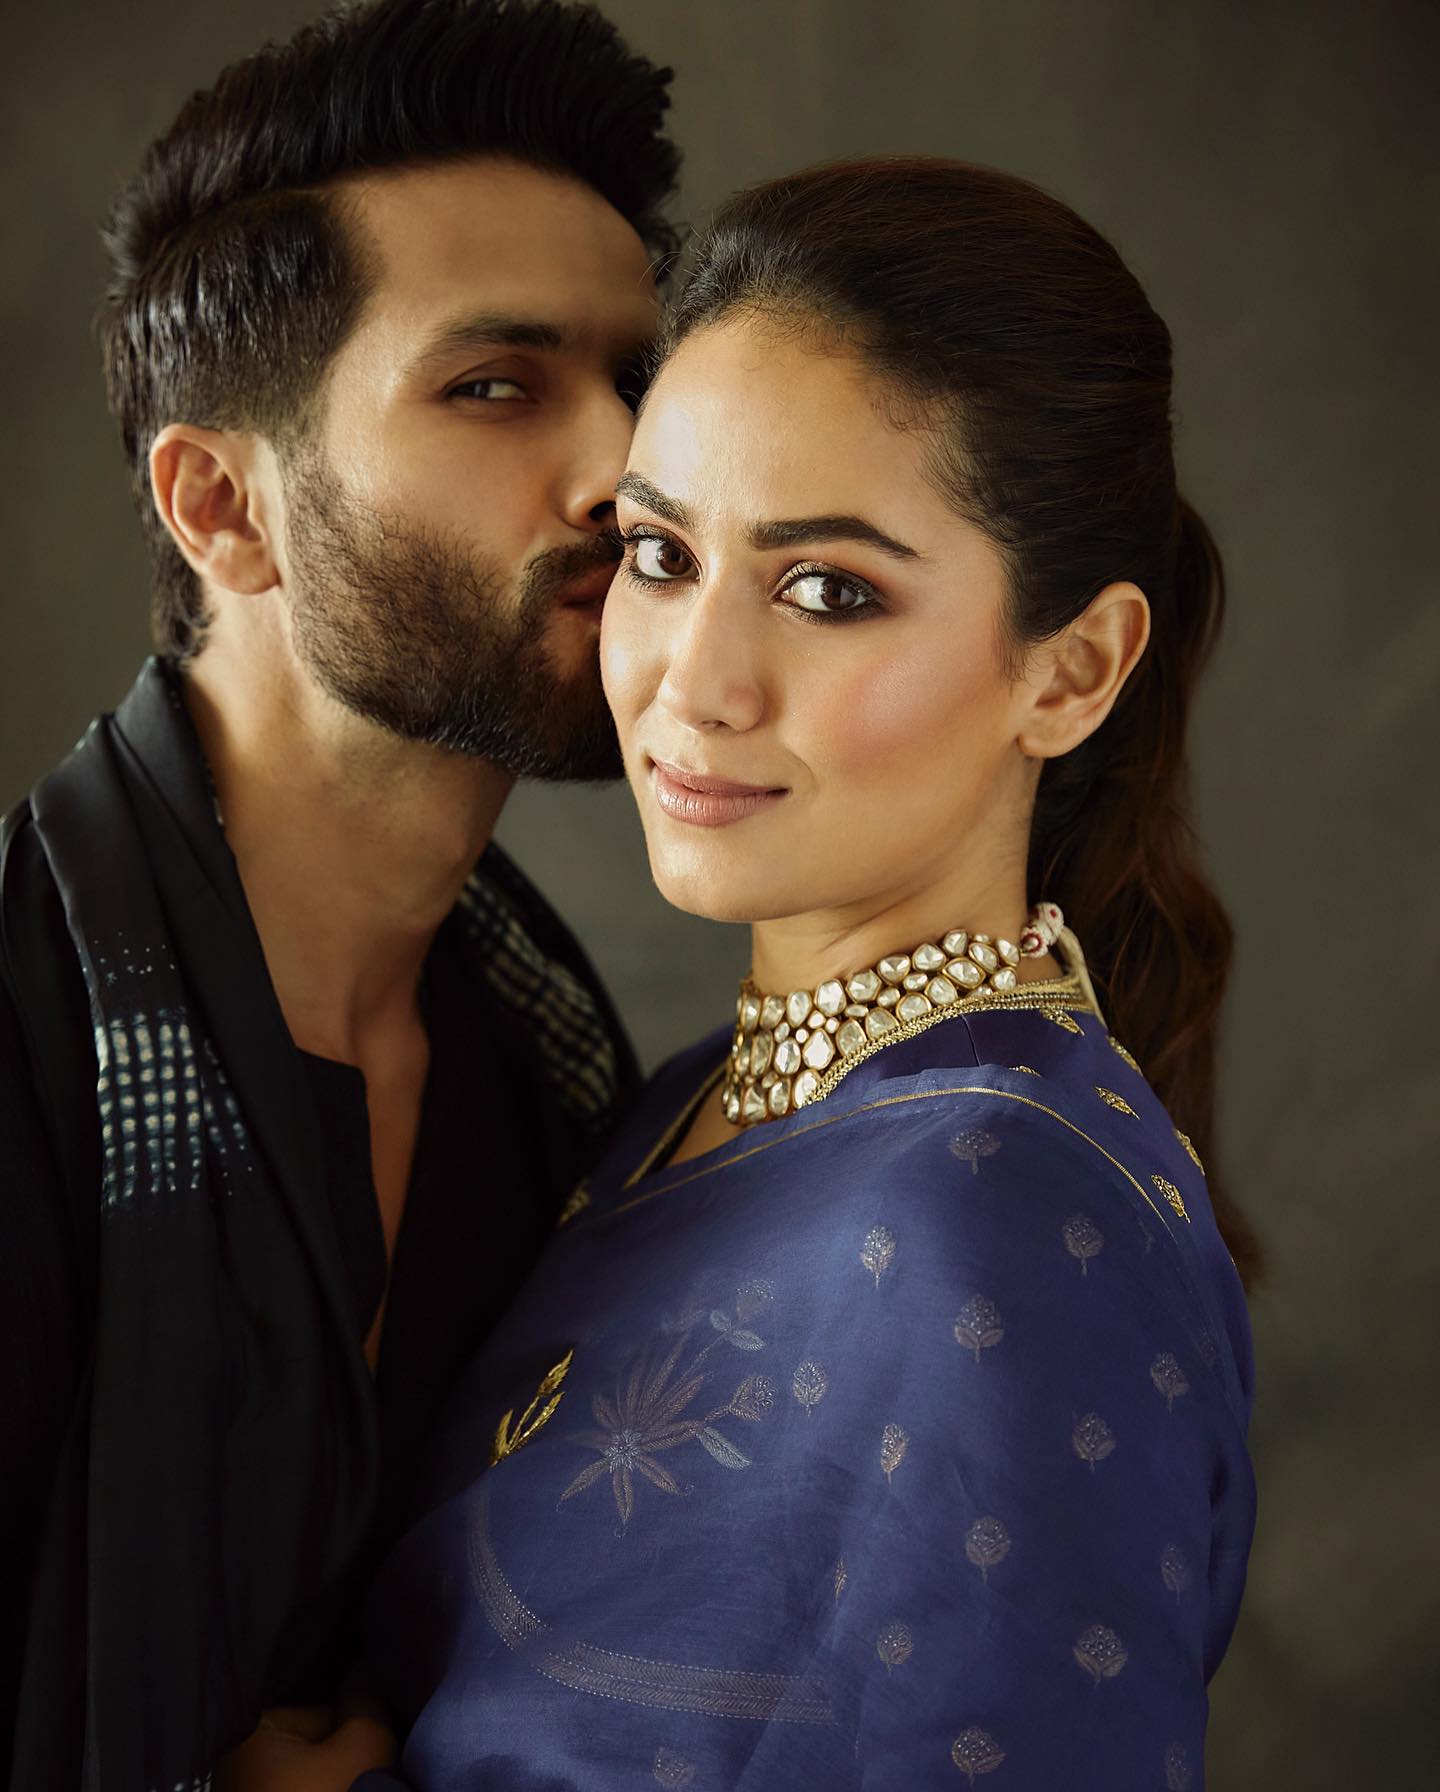 Couple Goals! Shahid Kapoor and Mira go mushy together on latter’s birthday 849592